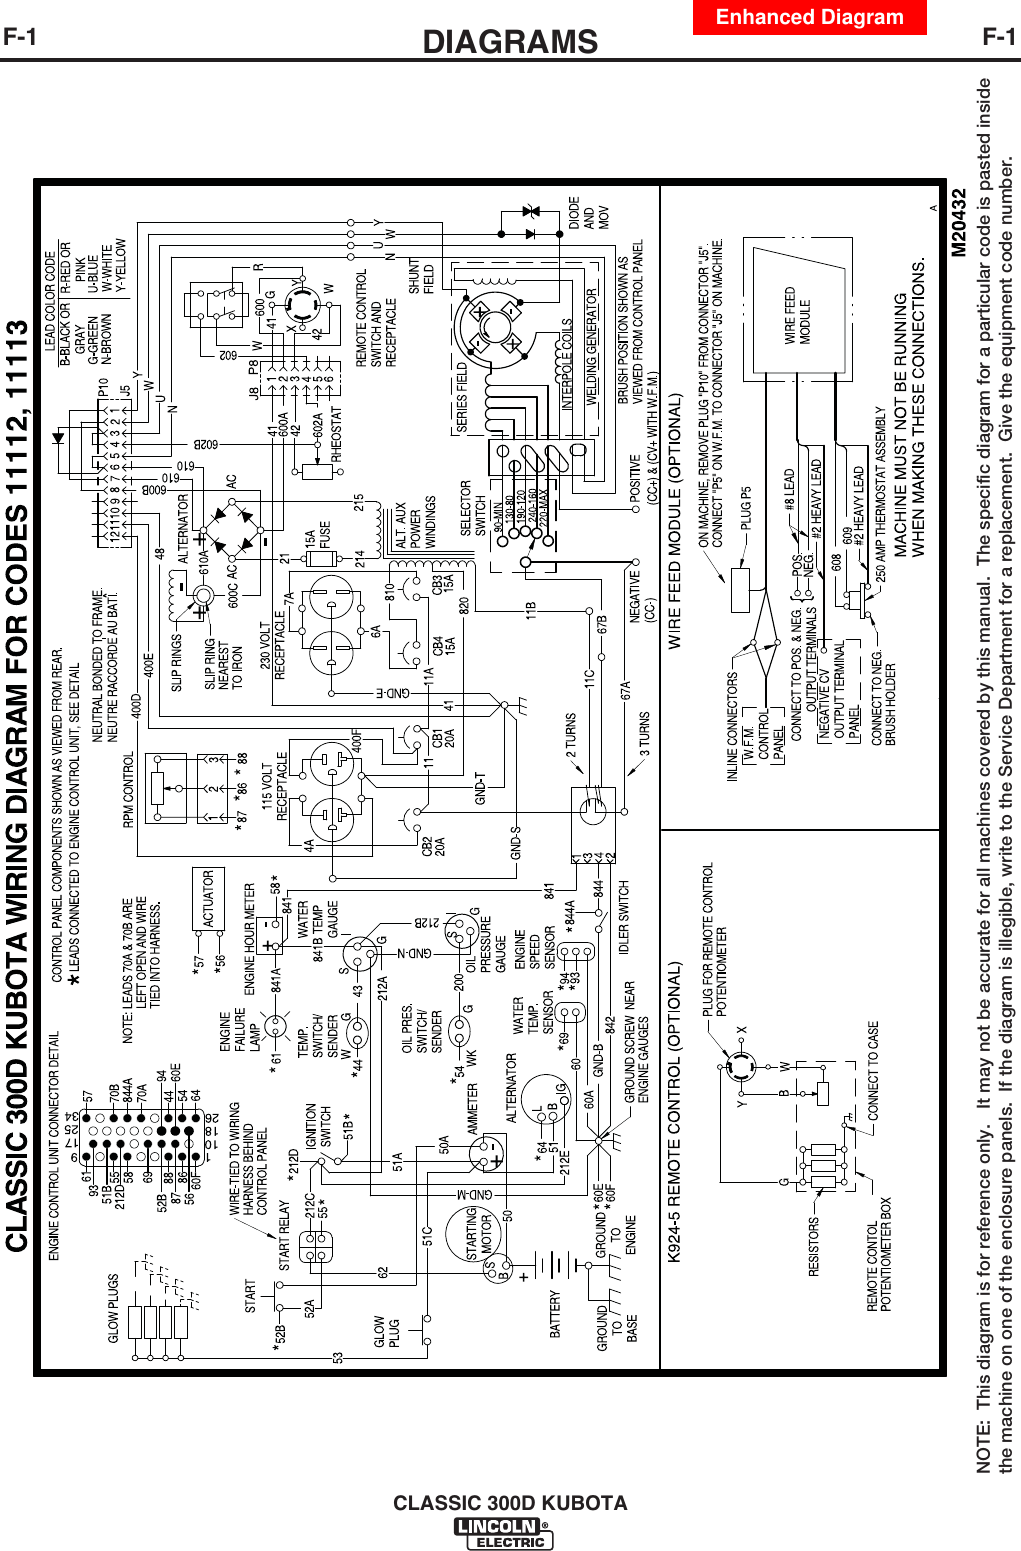 Lincoln 300d Wiring Diagram